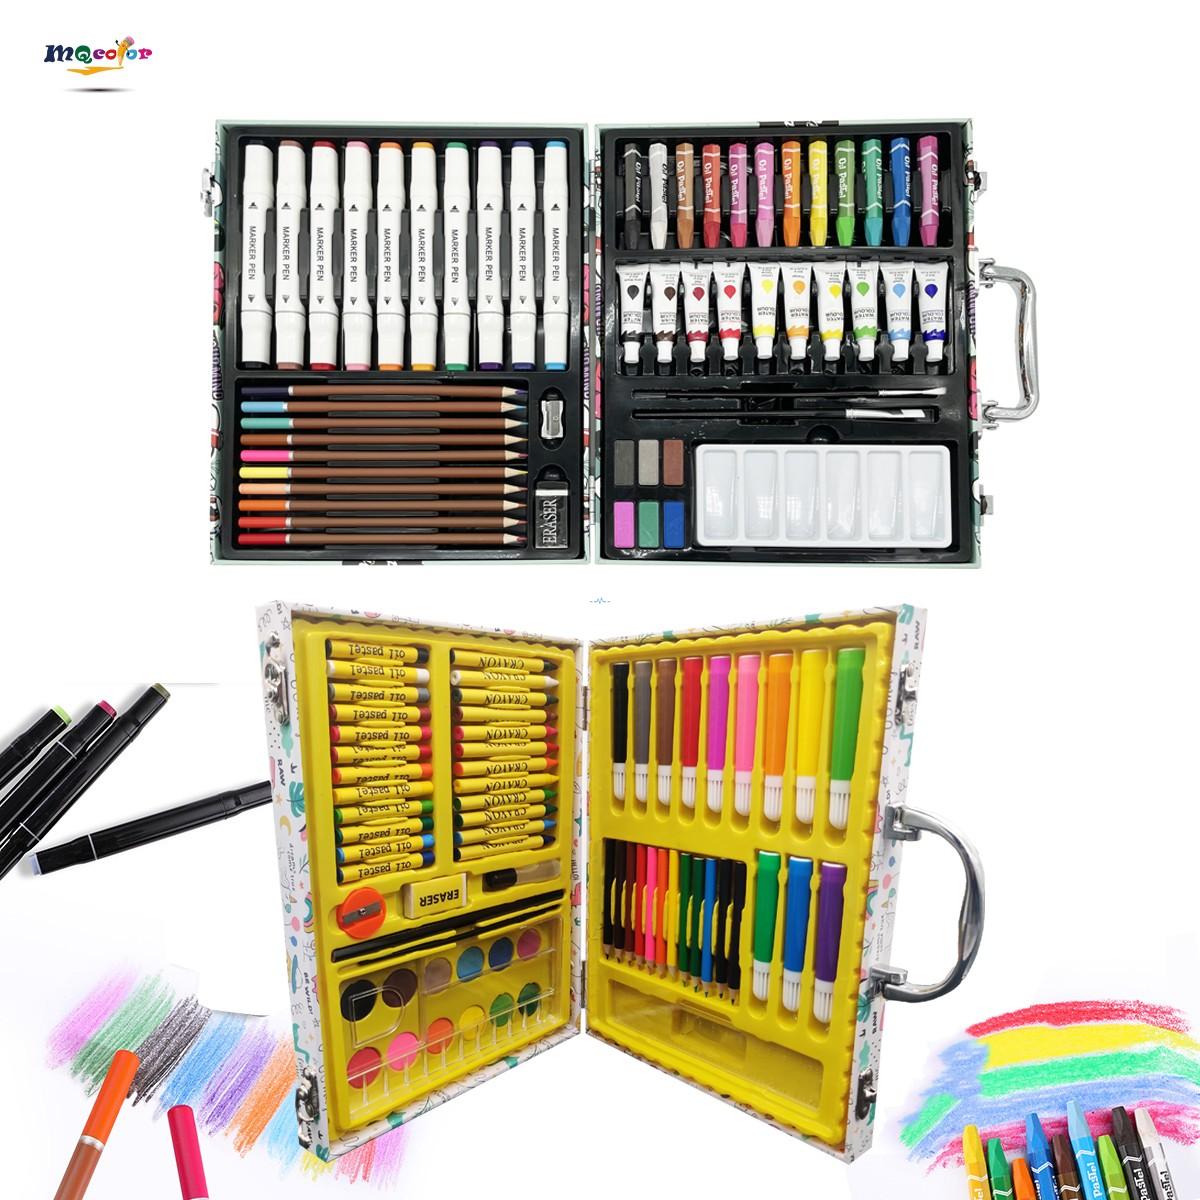 2022 New gifts nice pack 53 Pcs Non-Toxic Kids Wooden Box Watercolor Pen Colour Pencil Art Drawing Set Painting Set